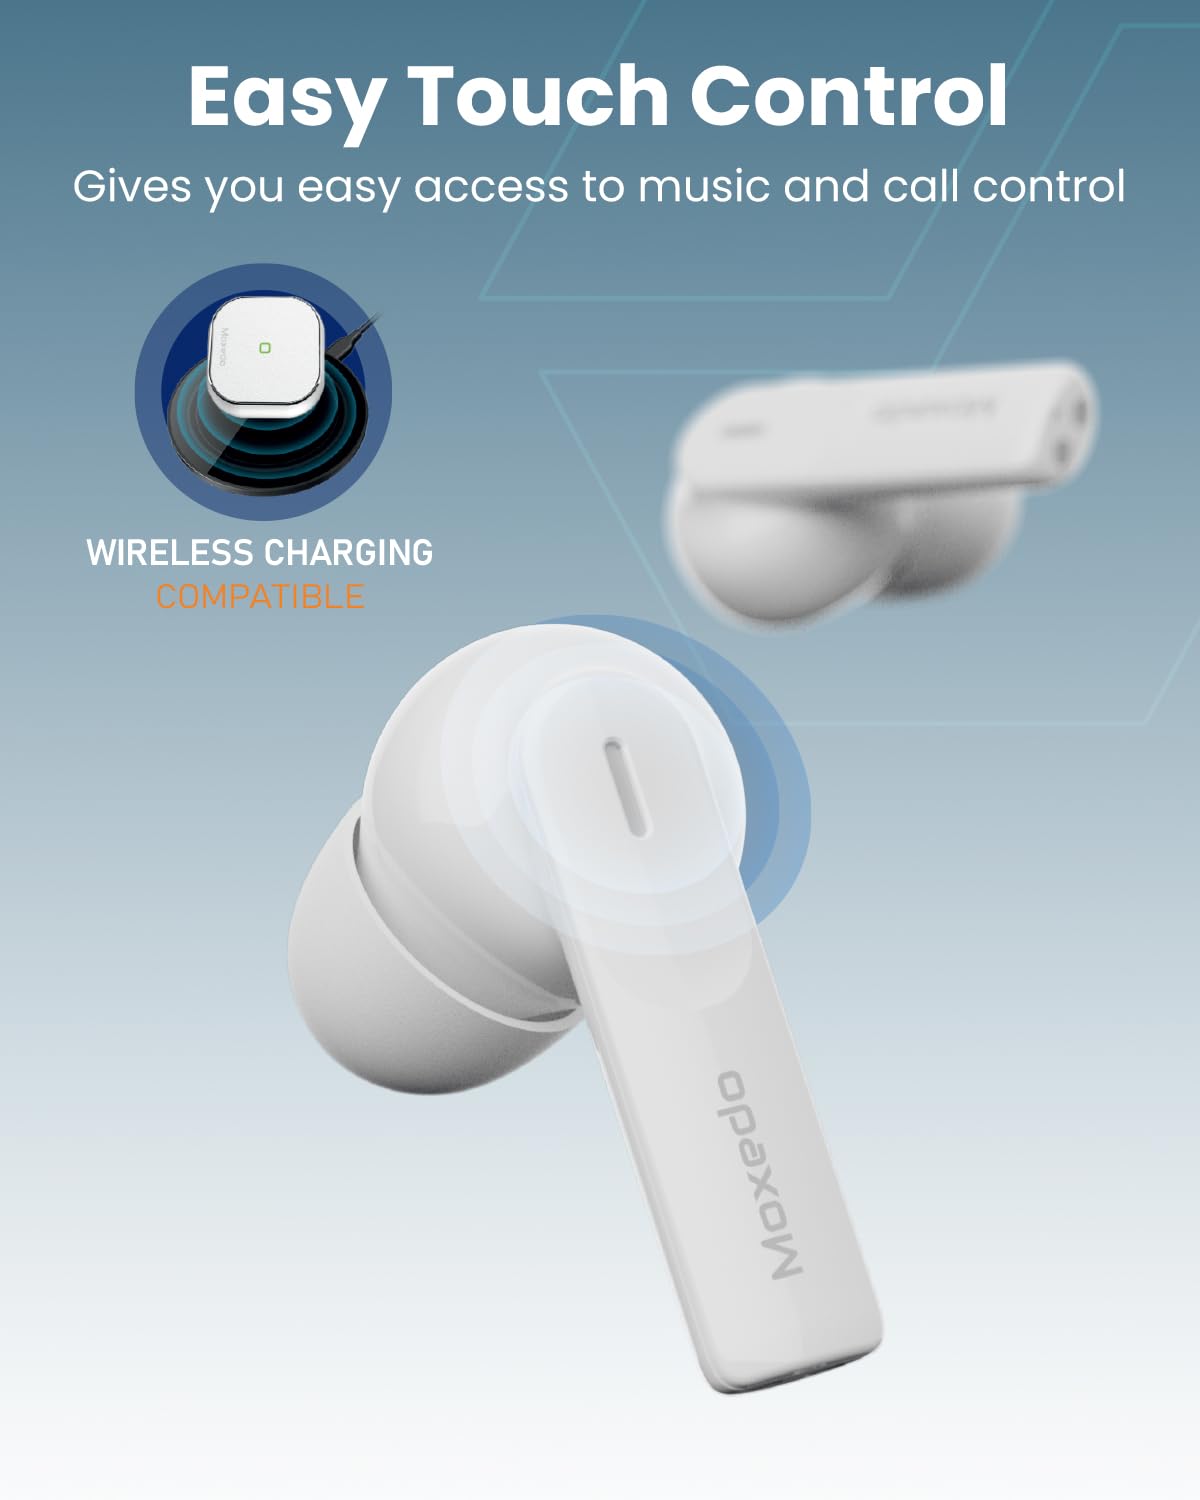 Moxedo Duo Beats 2 in 1 Wireless Bluetooth 5.3 Earbuds Dual Microphone Clear Calls, IPX4 Sweat Resistance Easy Touch Control, ENC Noise Reduction Technology - Silver